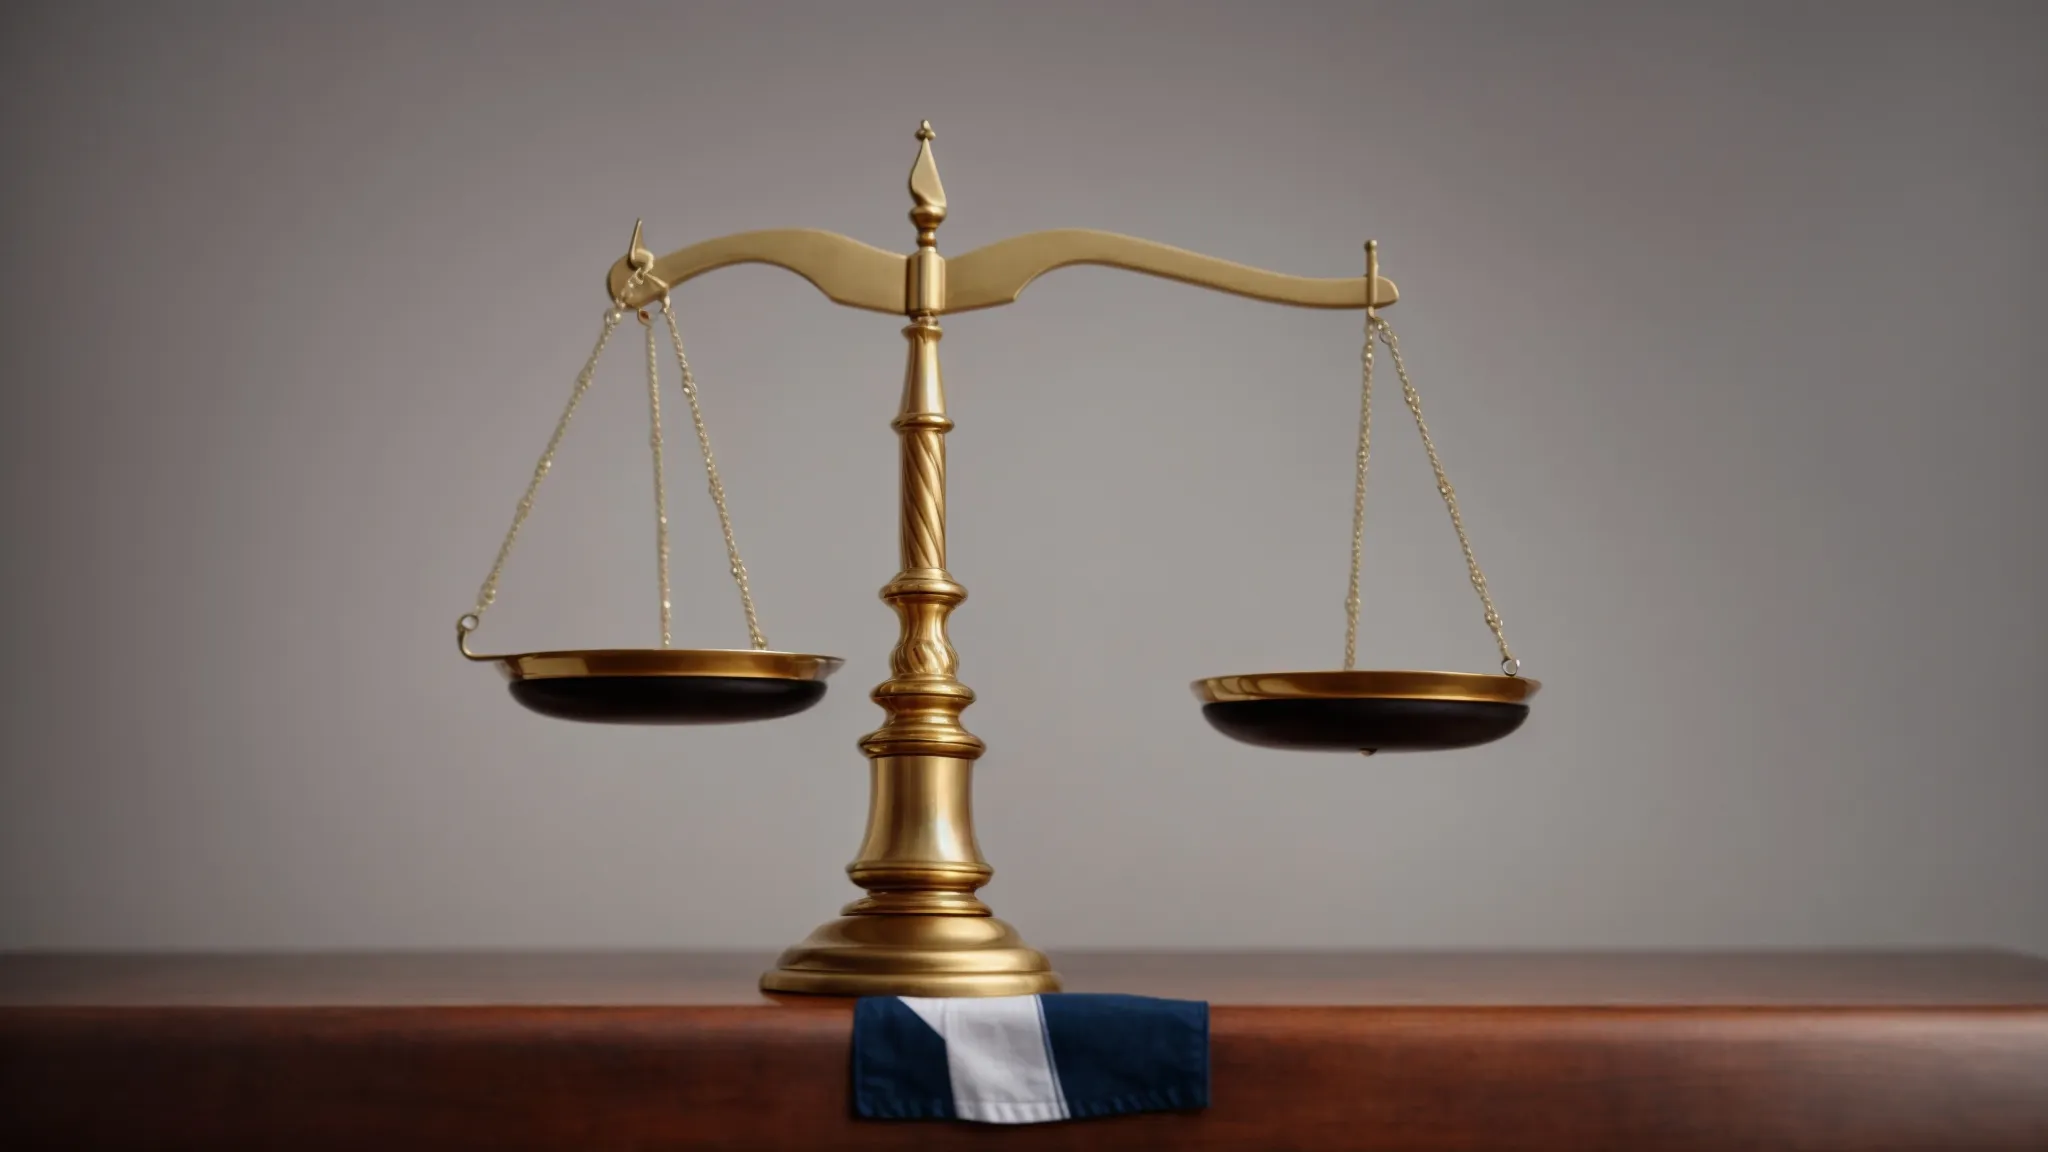 a balanced scale placed between two national flags under a gavel, symbolizing the arbitration process in international disputes.